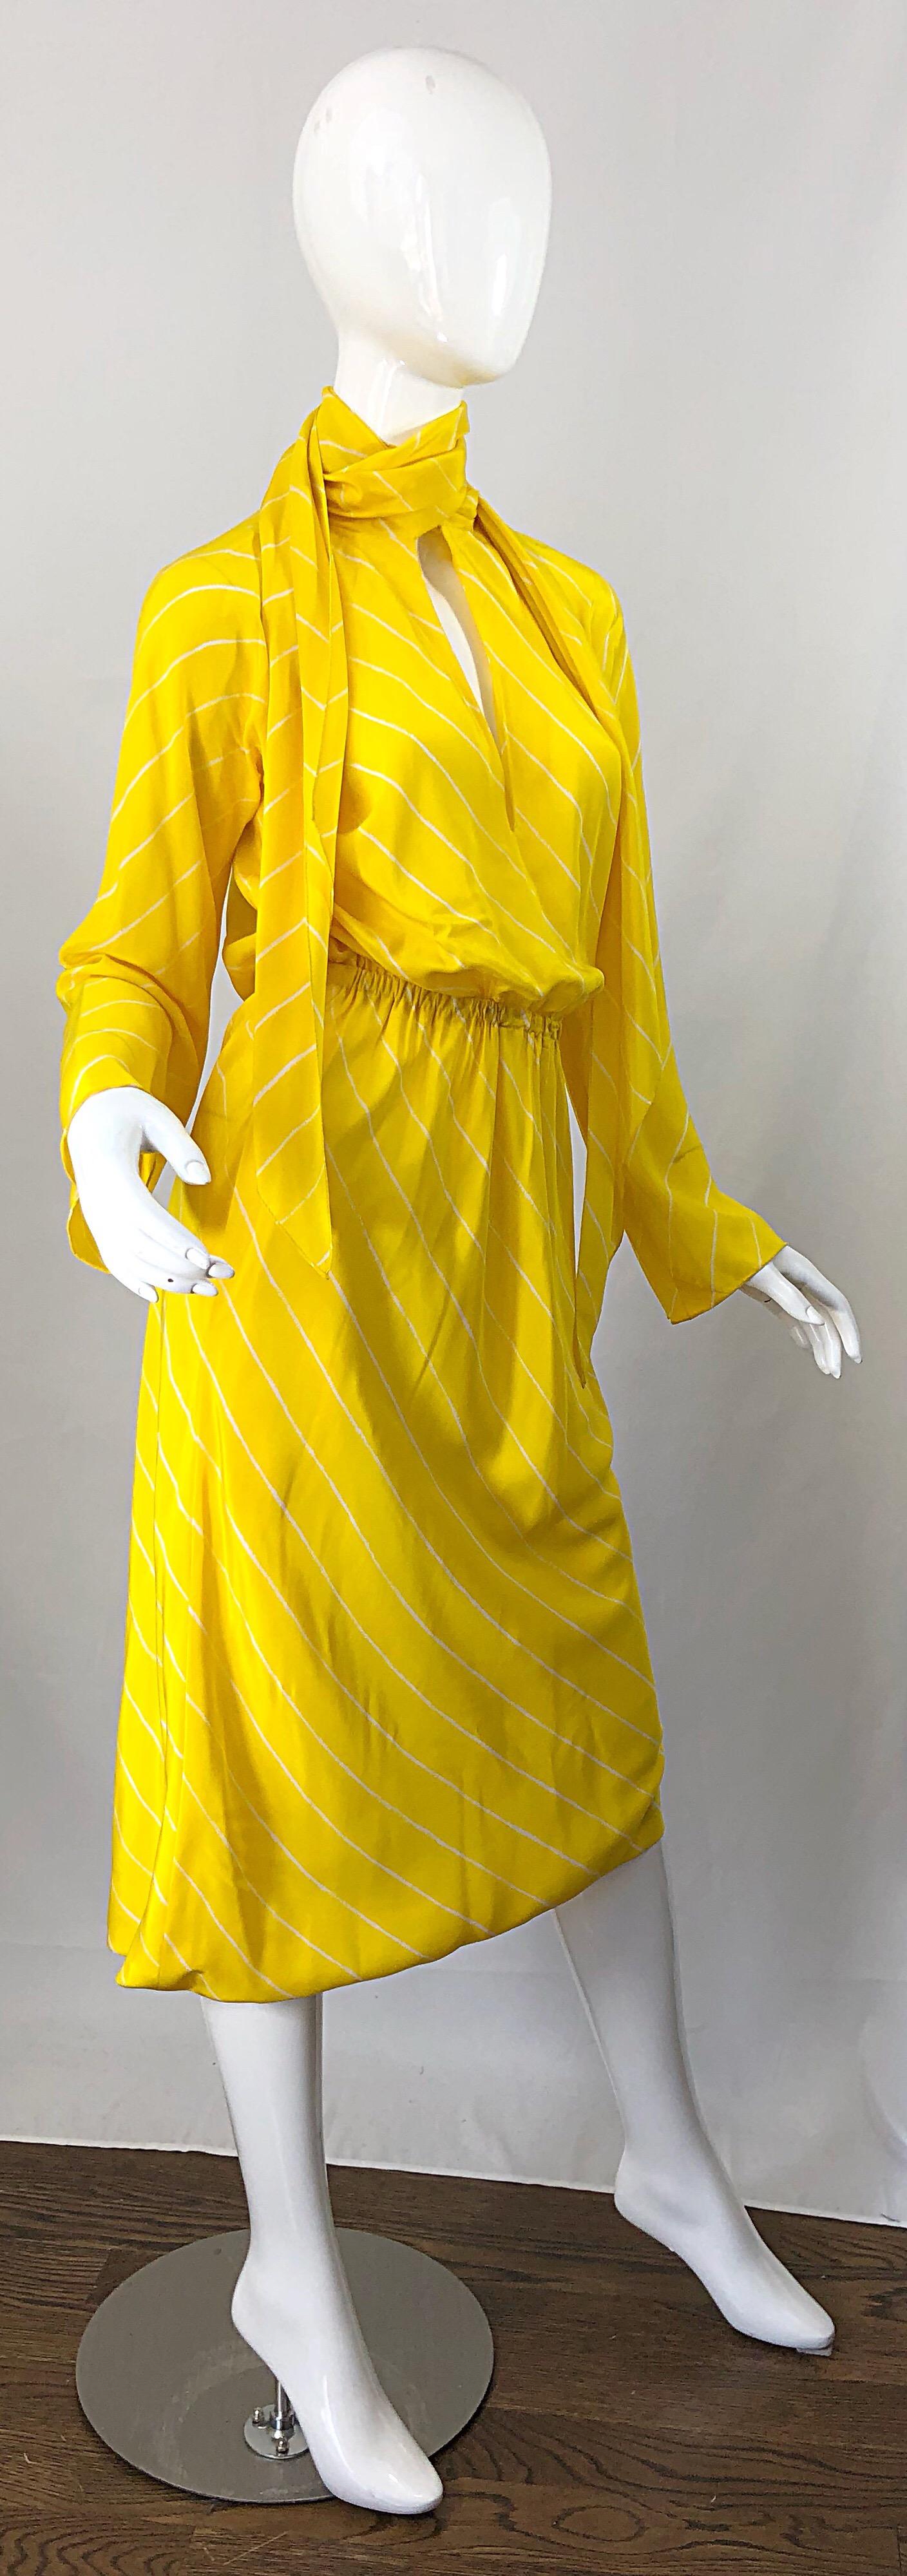 1970s Halston Canary Yellow + White Chevron Striped Bell Sleeve 70s Scarf Dress 4